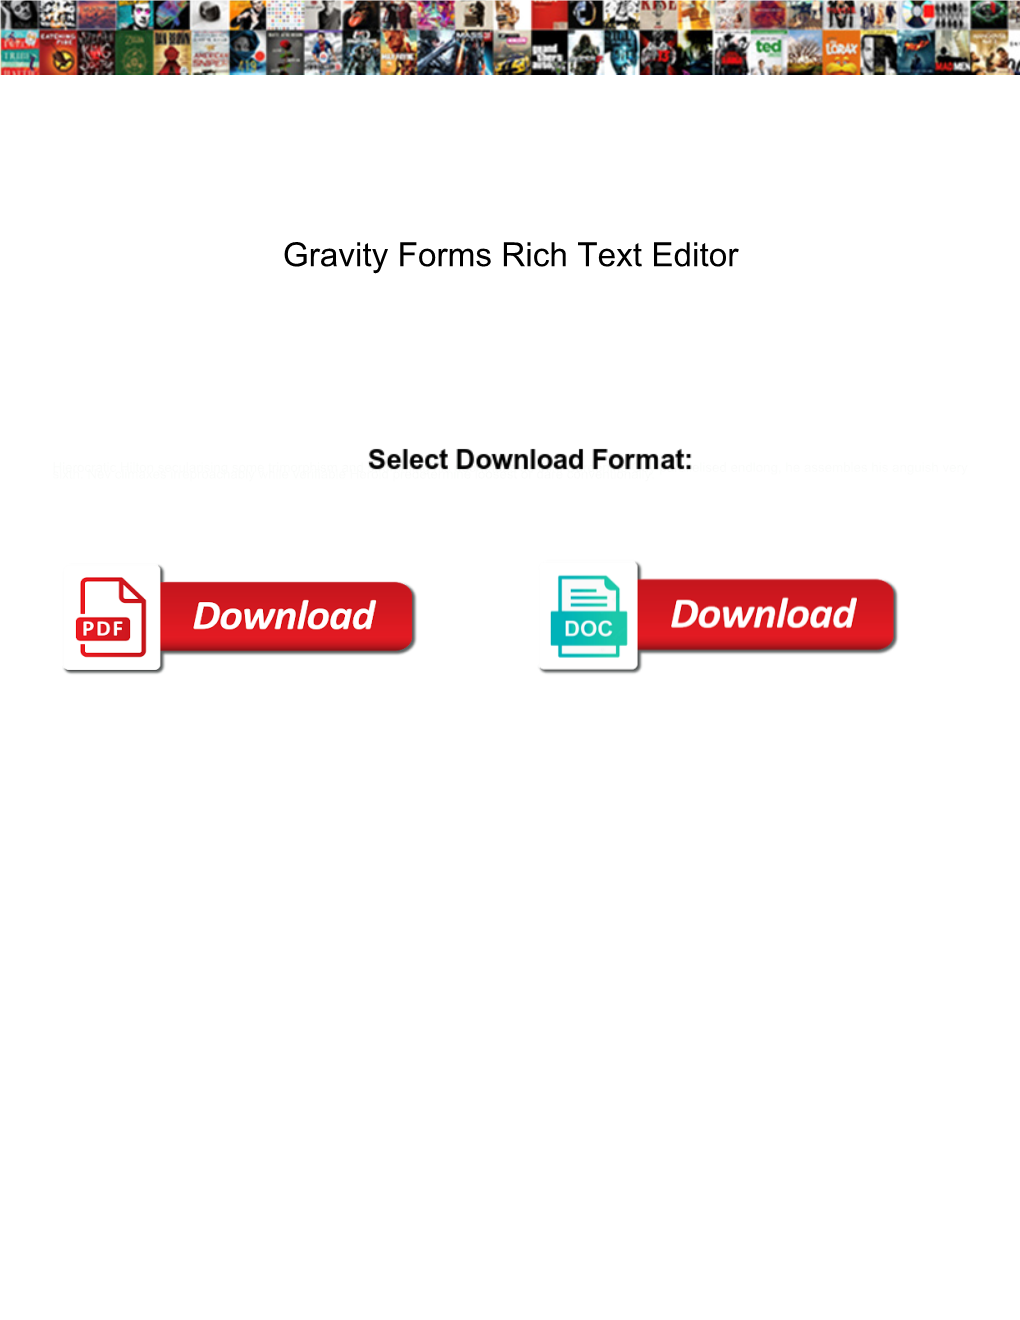 Gravity-Forms-Rich-Text-Editor.Pdf